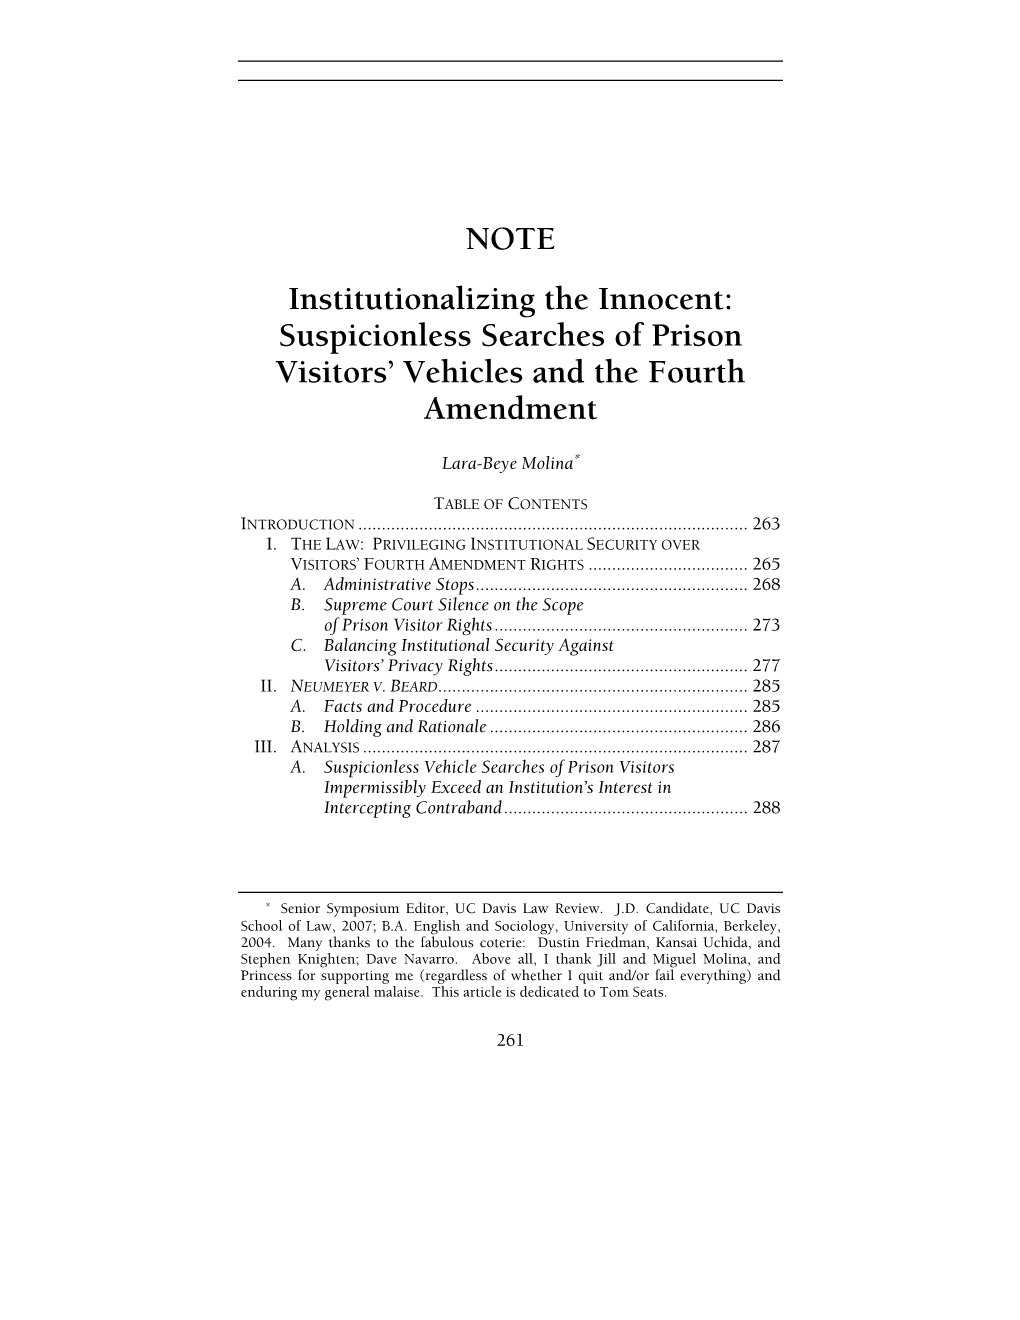 NOTE Institutionalizing the Innocent: Suspicionless Searches of Prison Visitors' Vehicles and the Fourth Amendment